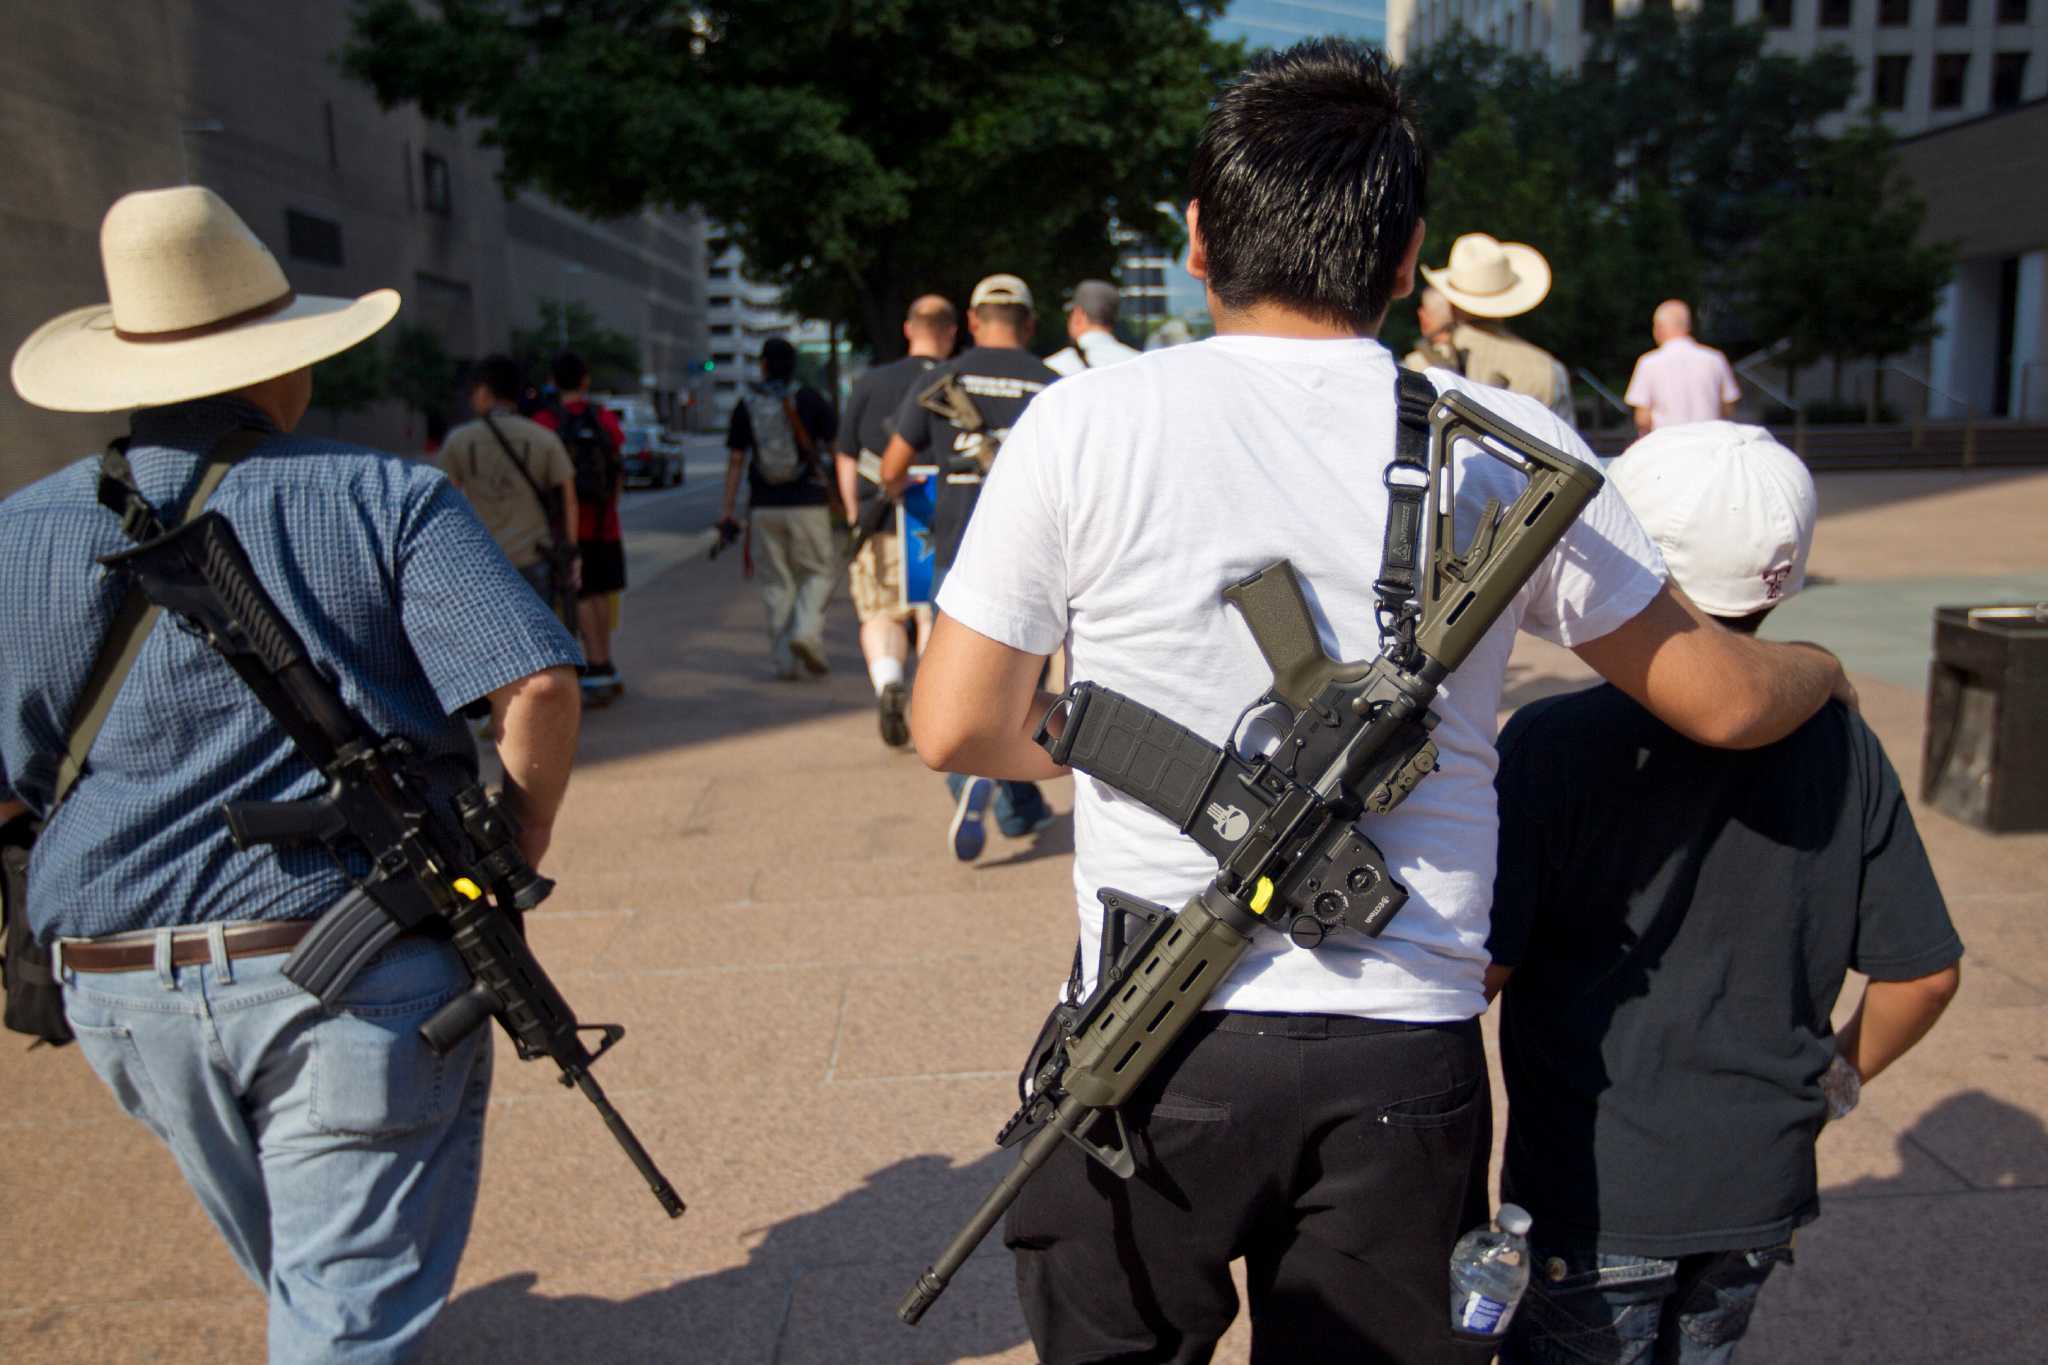 While Texas Holds Out Majority Of Us Allows Open Carry